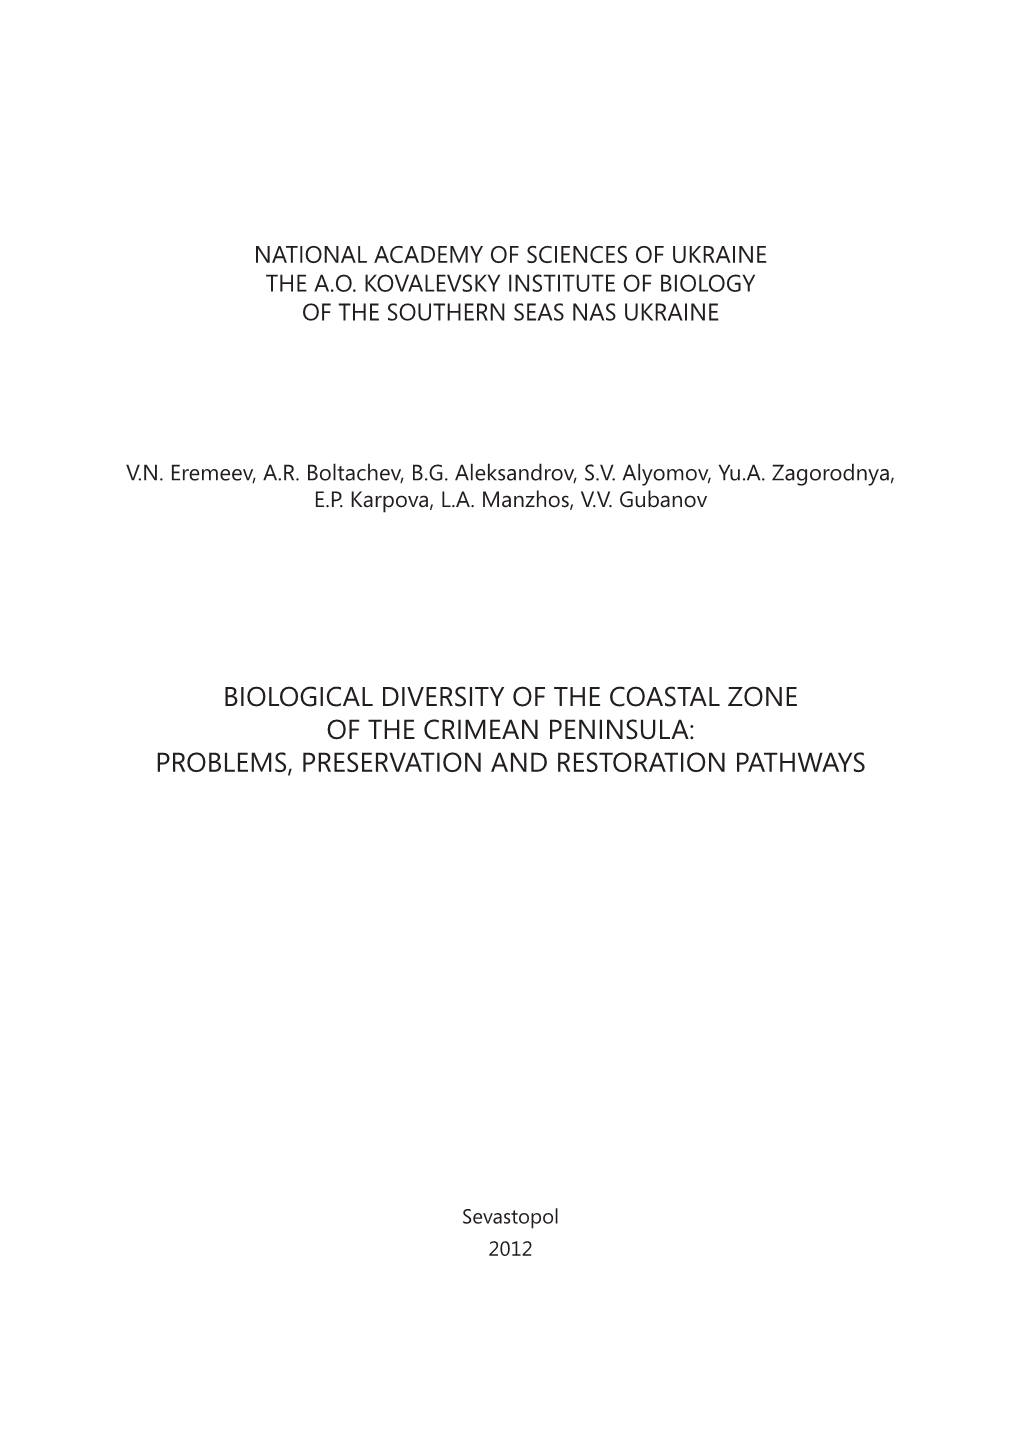 Biological Diversity of the Coastal Zone of the Crimean Peninsula: Problems, Preservation and Restoration Pathways